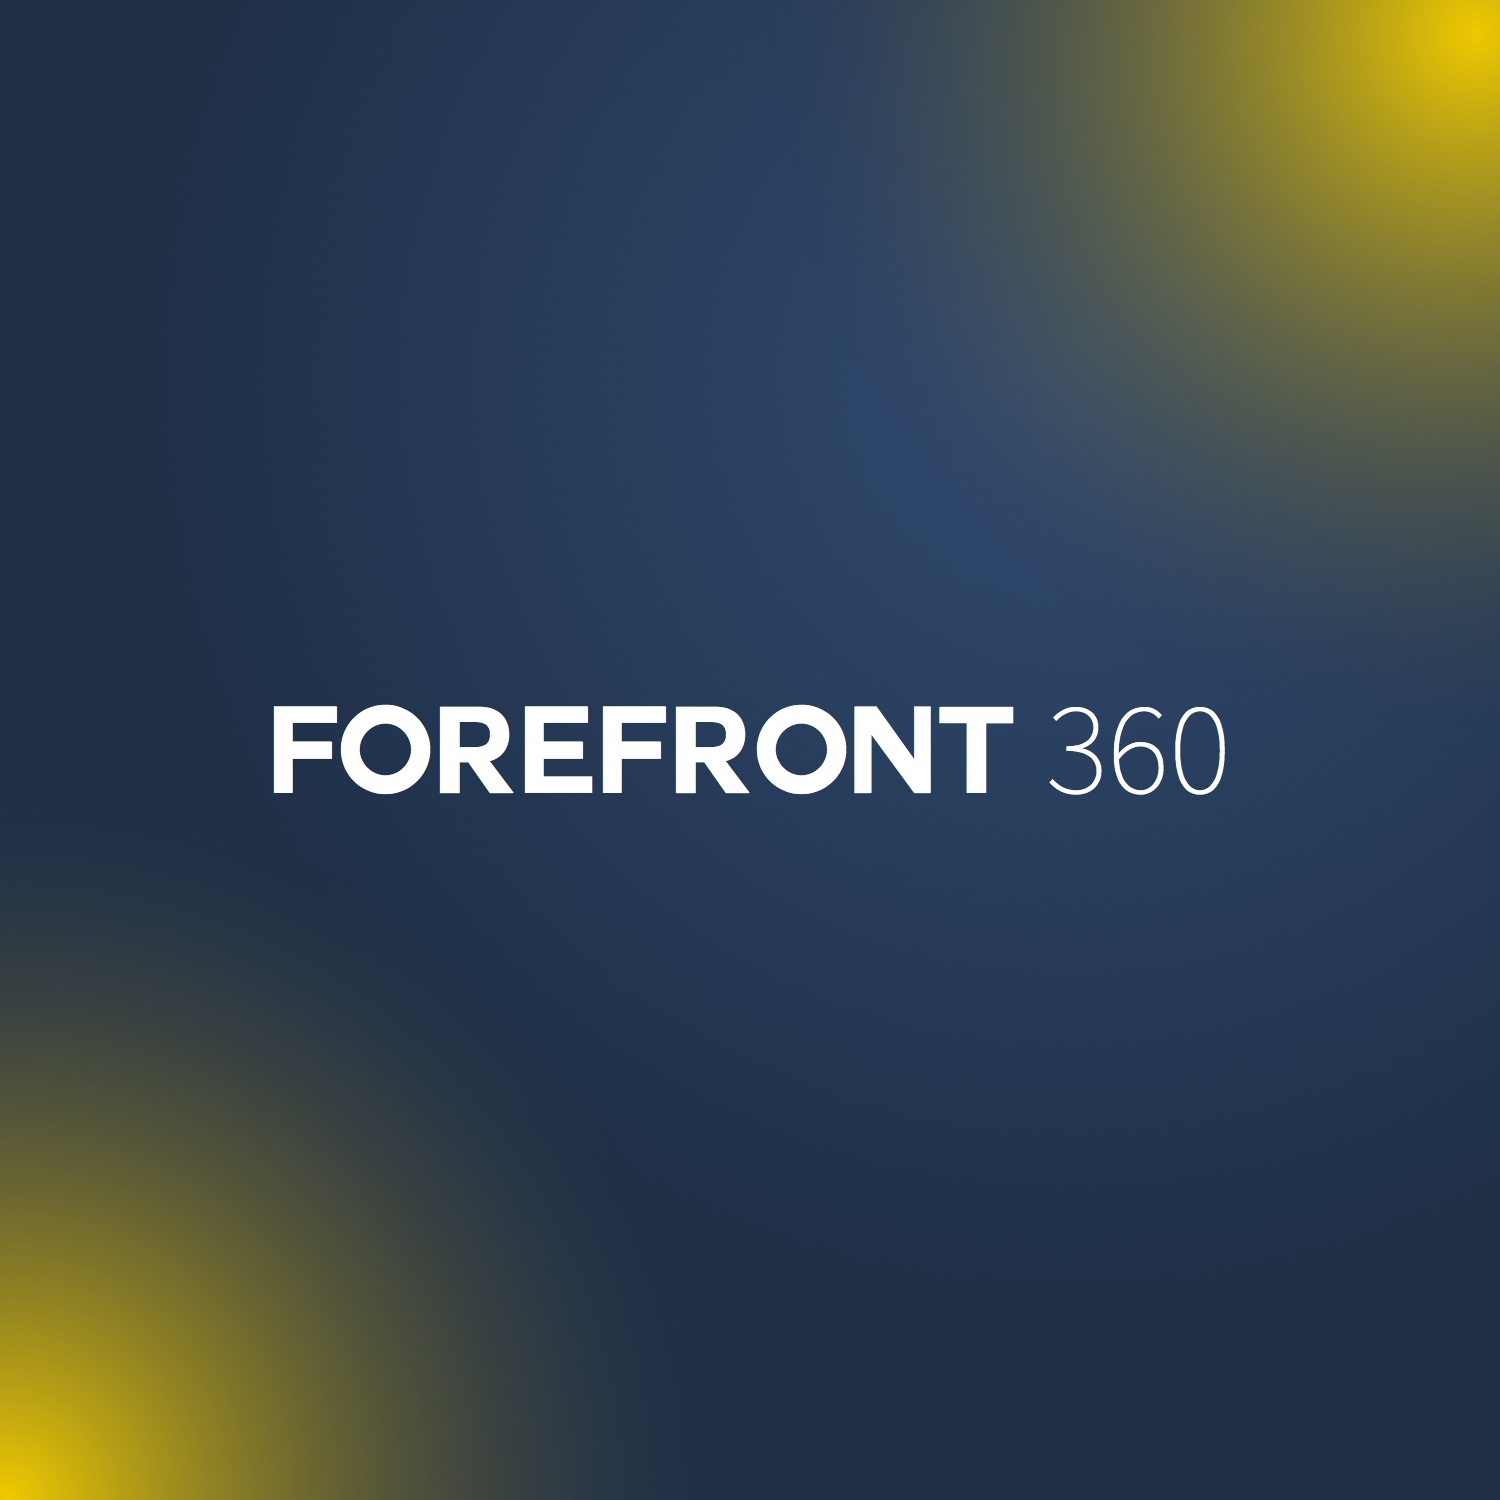 Forefront 360